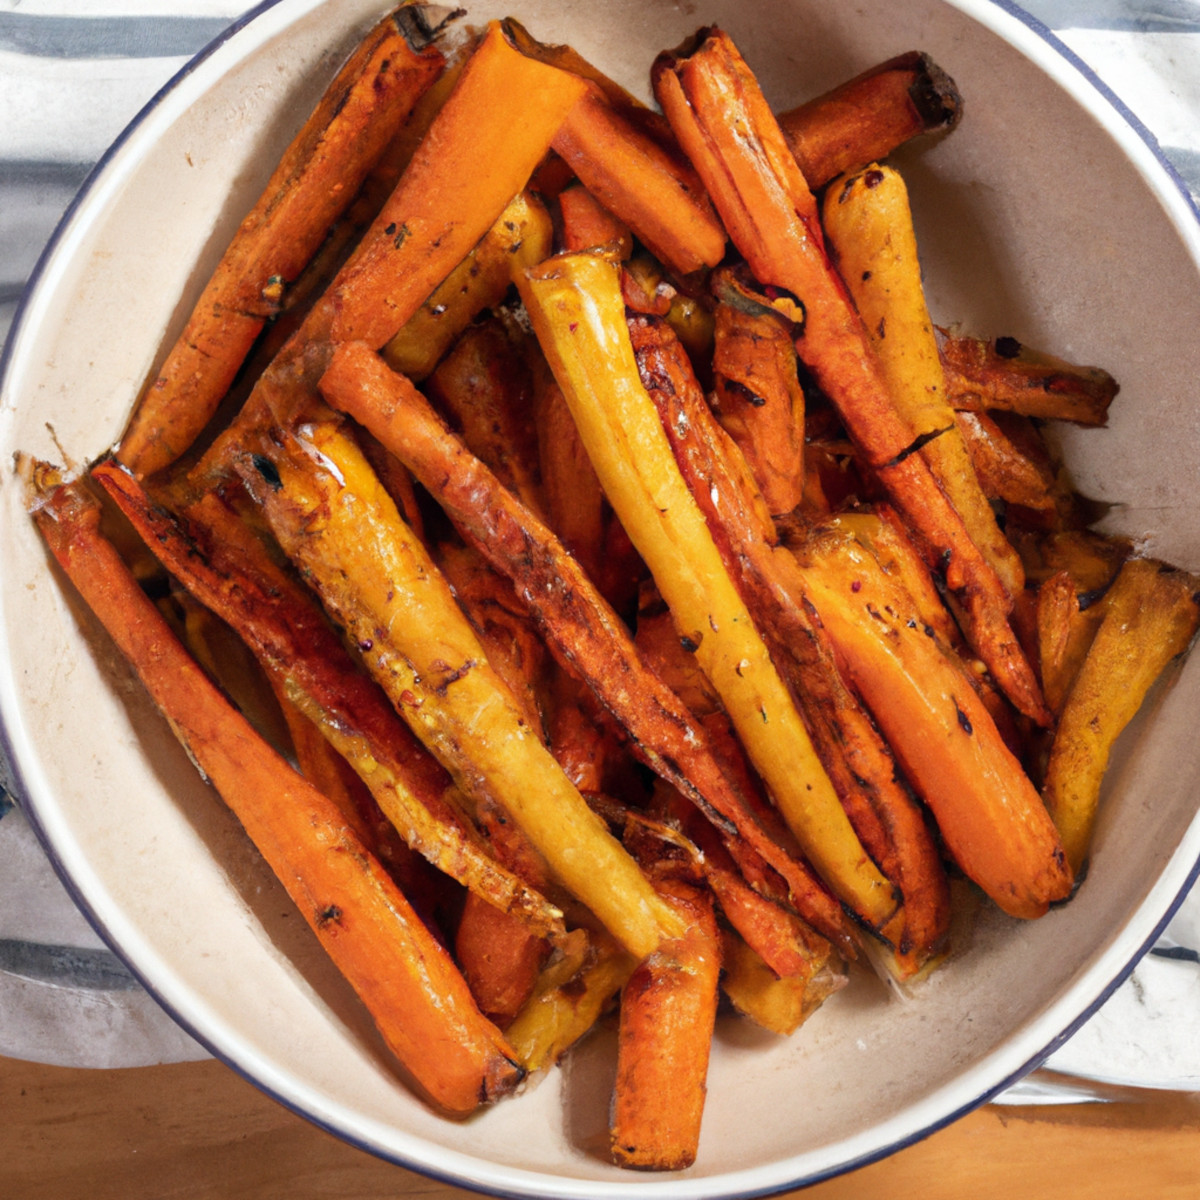 caramelized carrots and parsnips